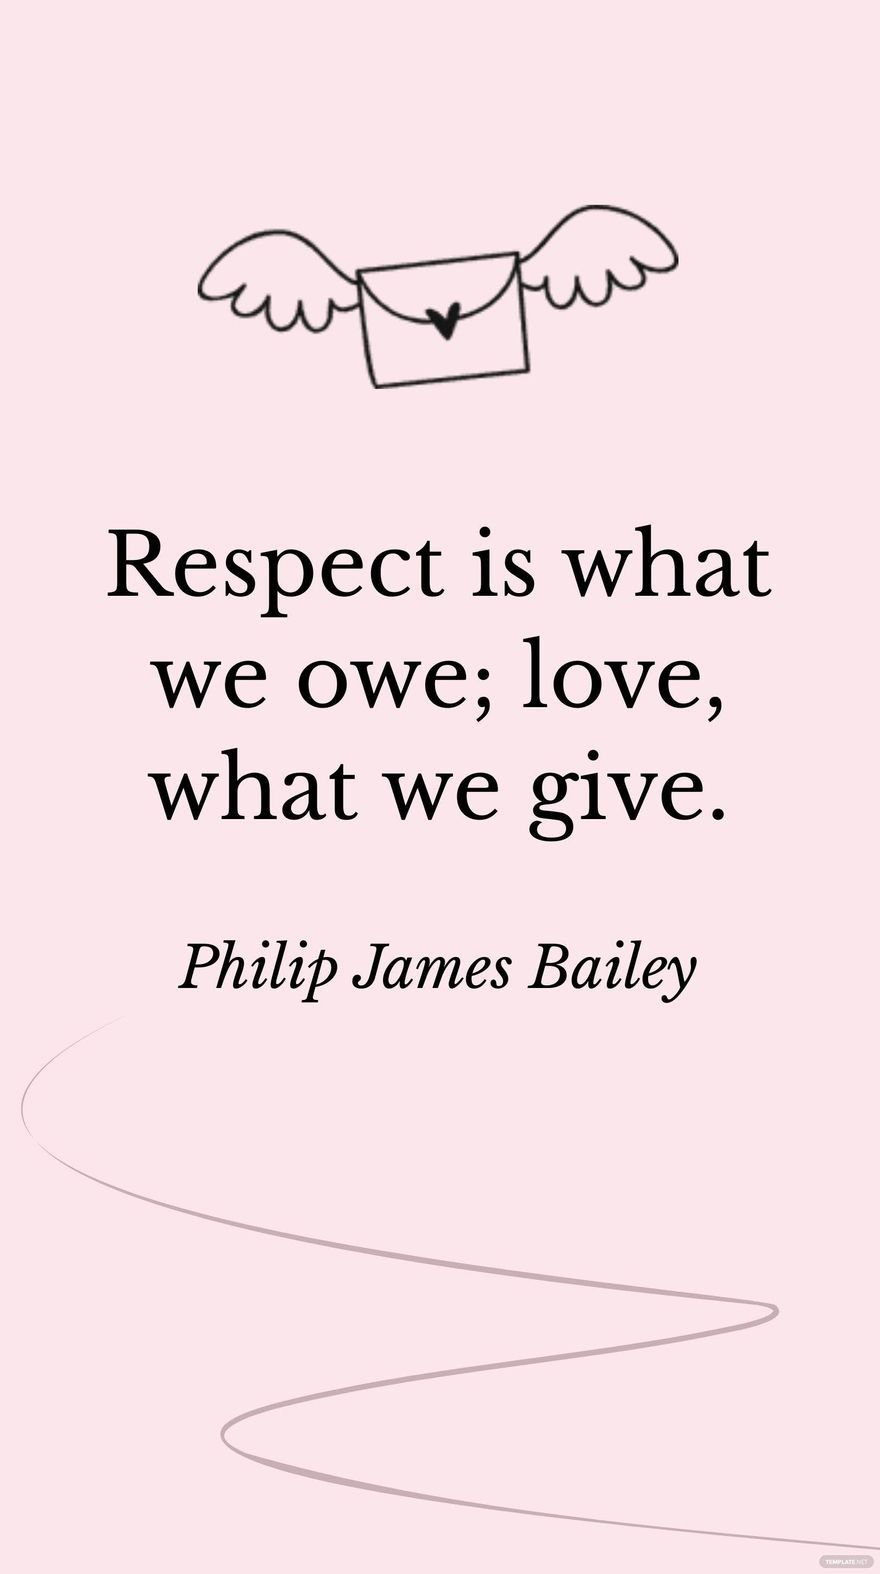 Free Philip James Bailey - Respect is what we owe; love, what we give. in JPG